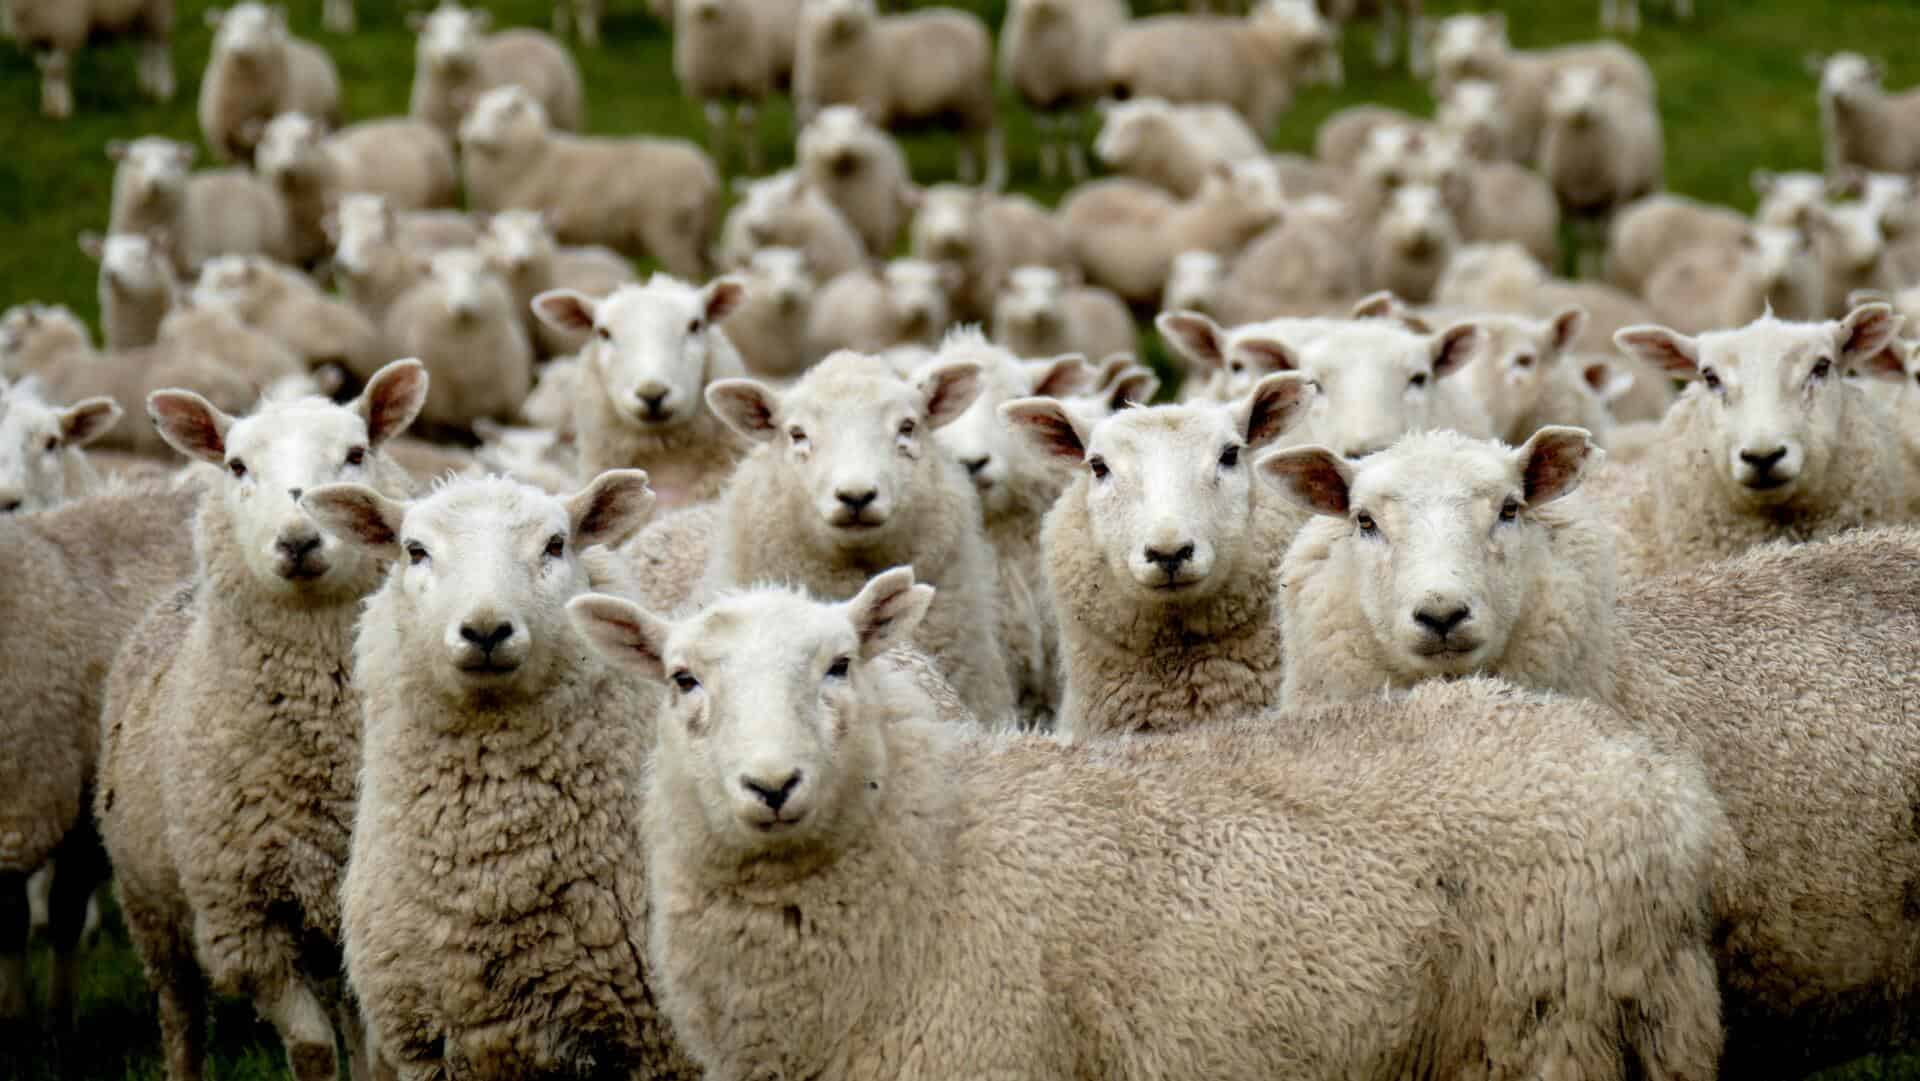 From sheep to shops: the journey of wool fabrics and clothing